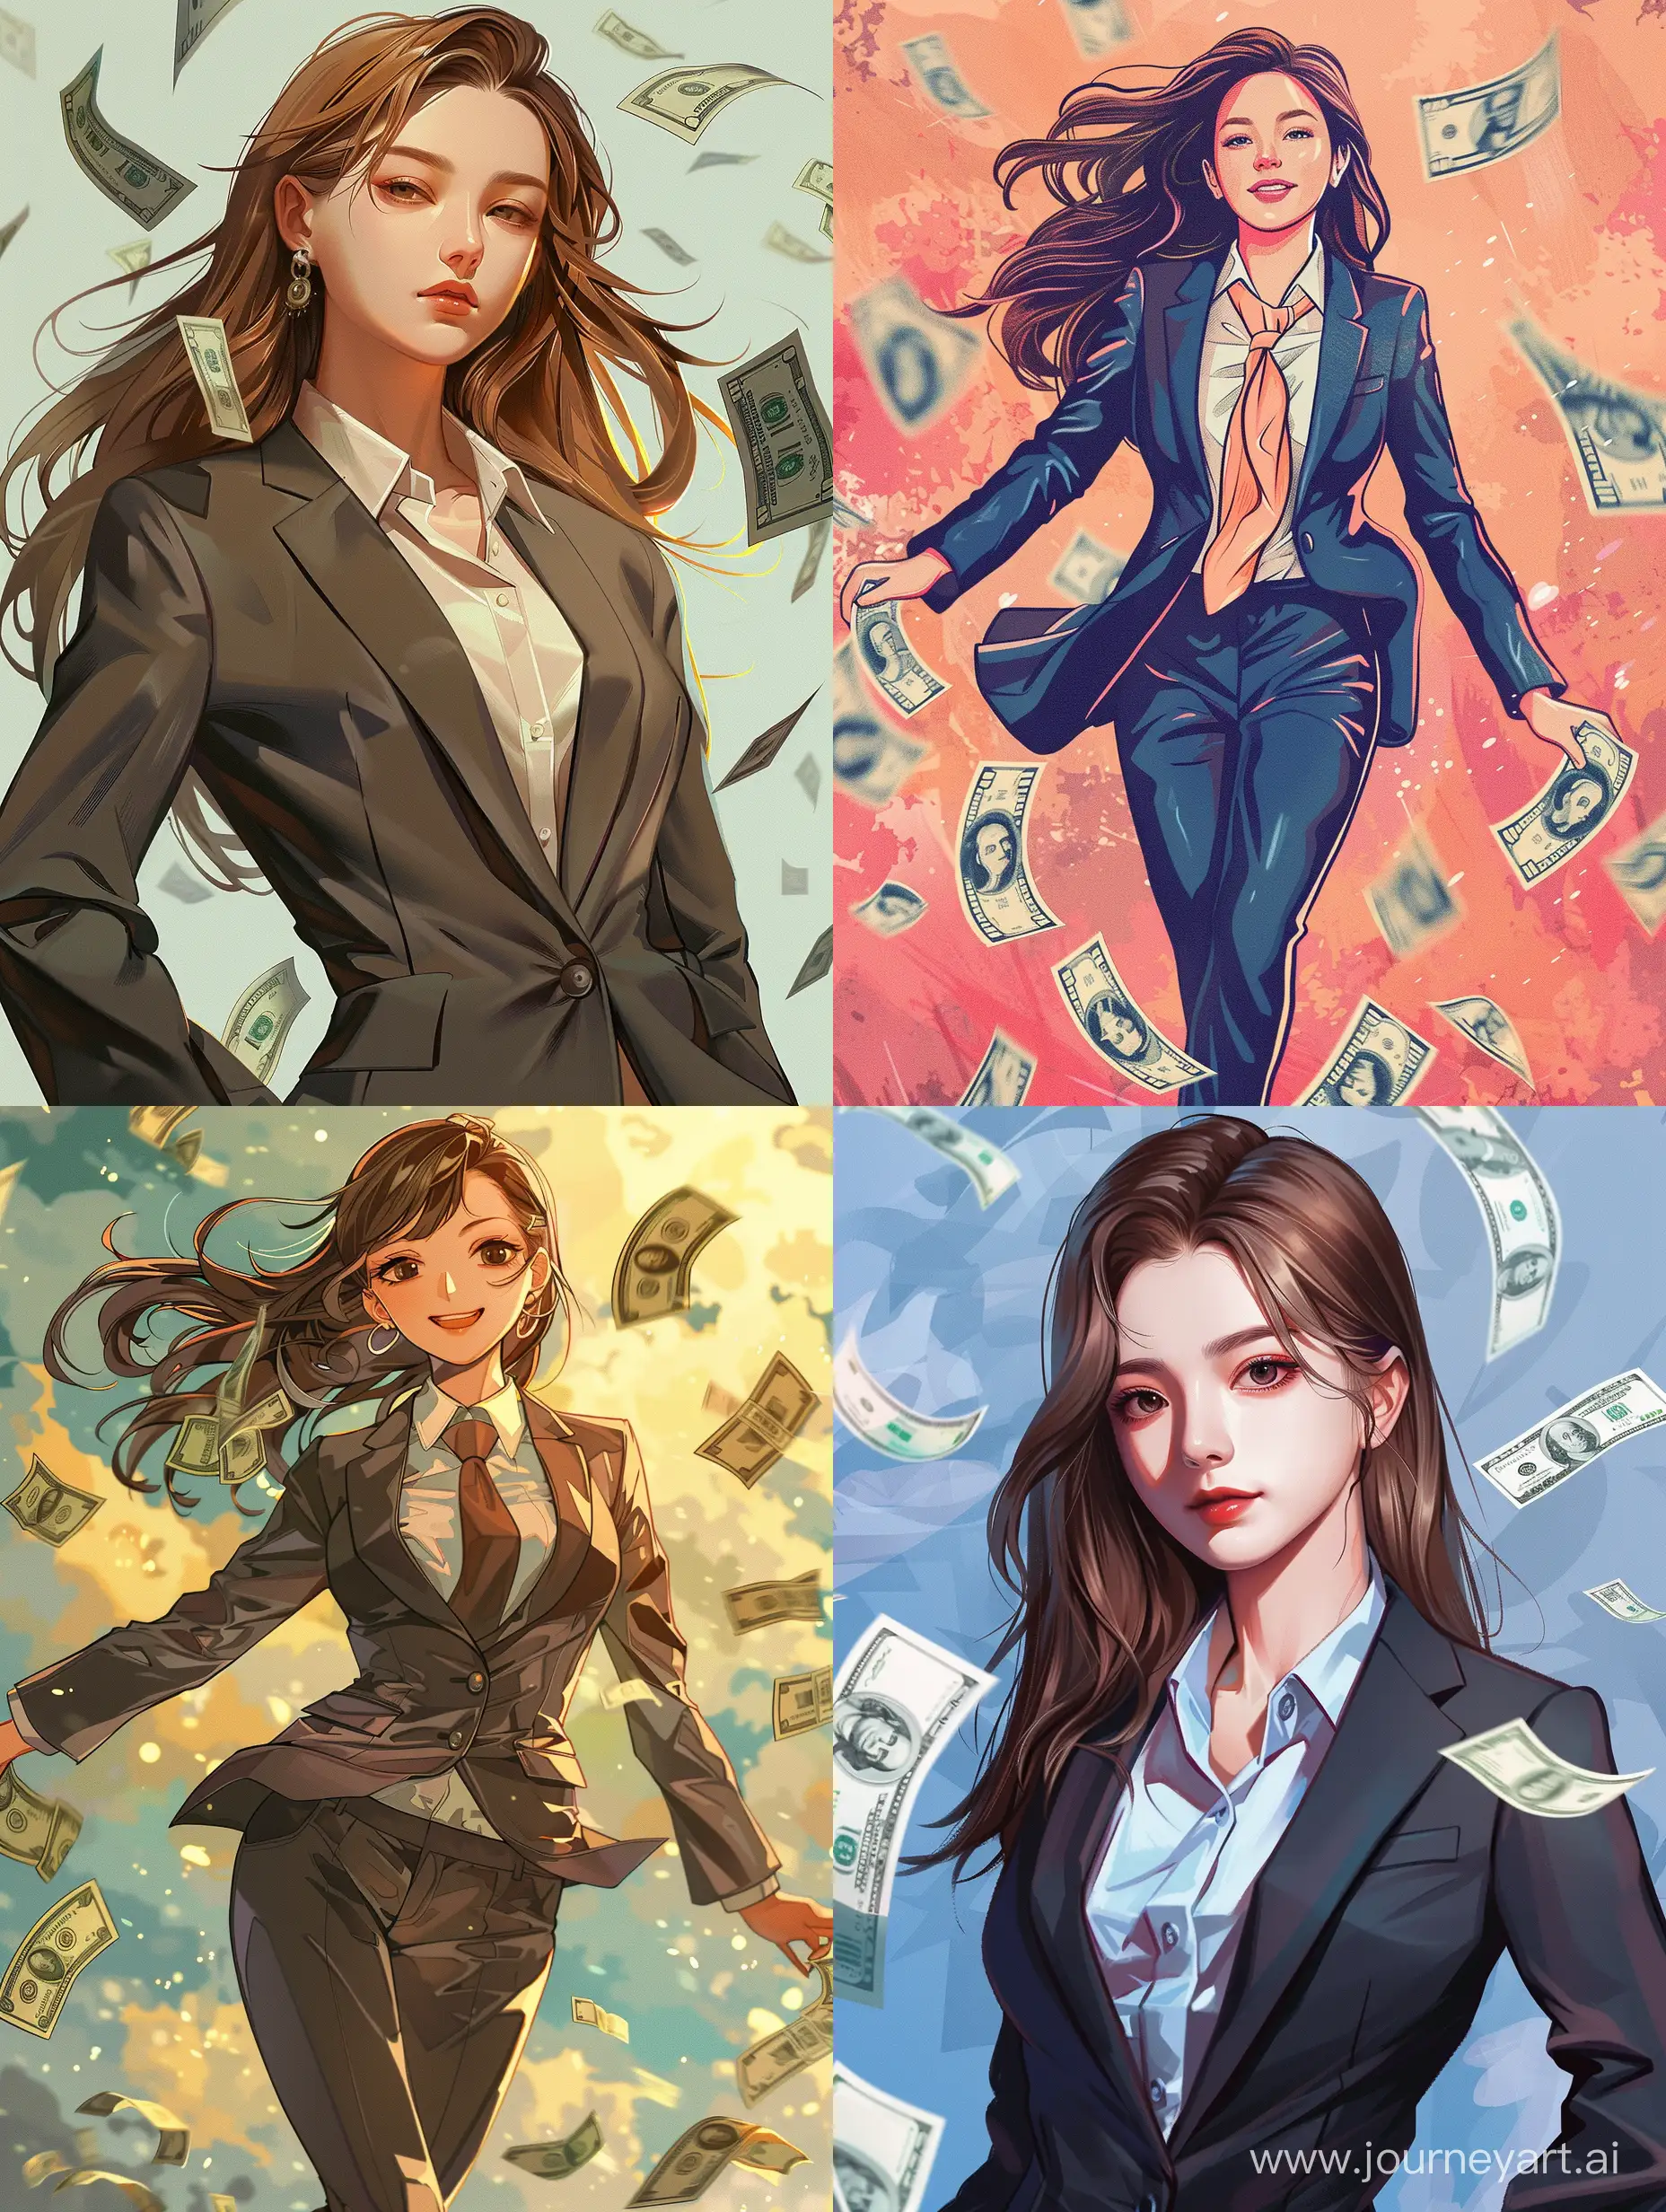 Attractive-Businesswoman-Surrounded-by-Falling-Money-Bills